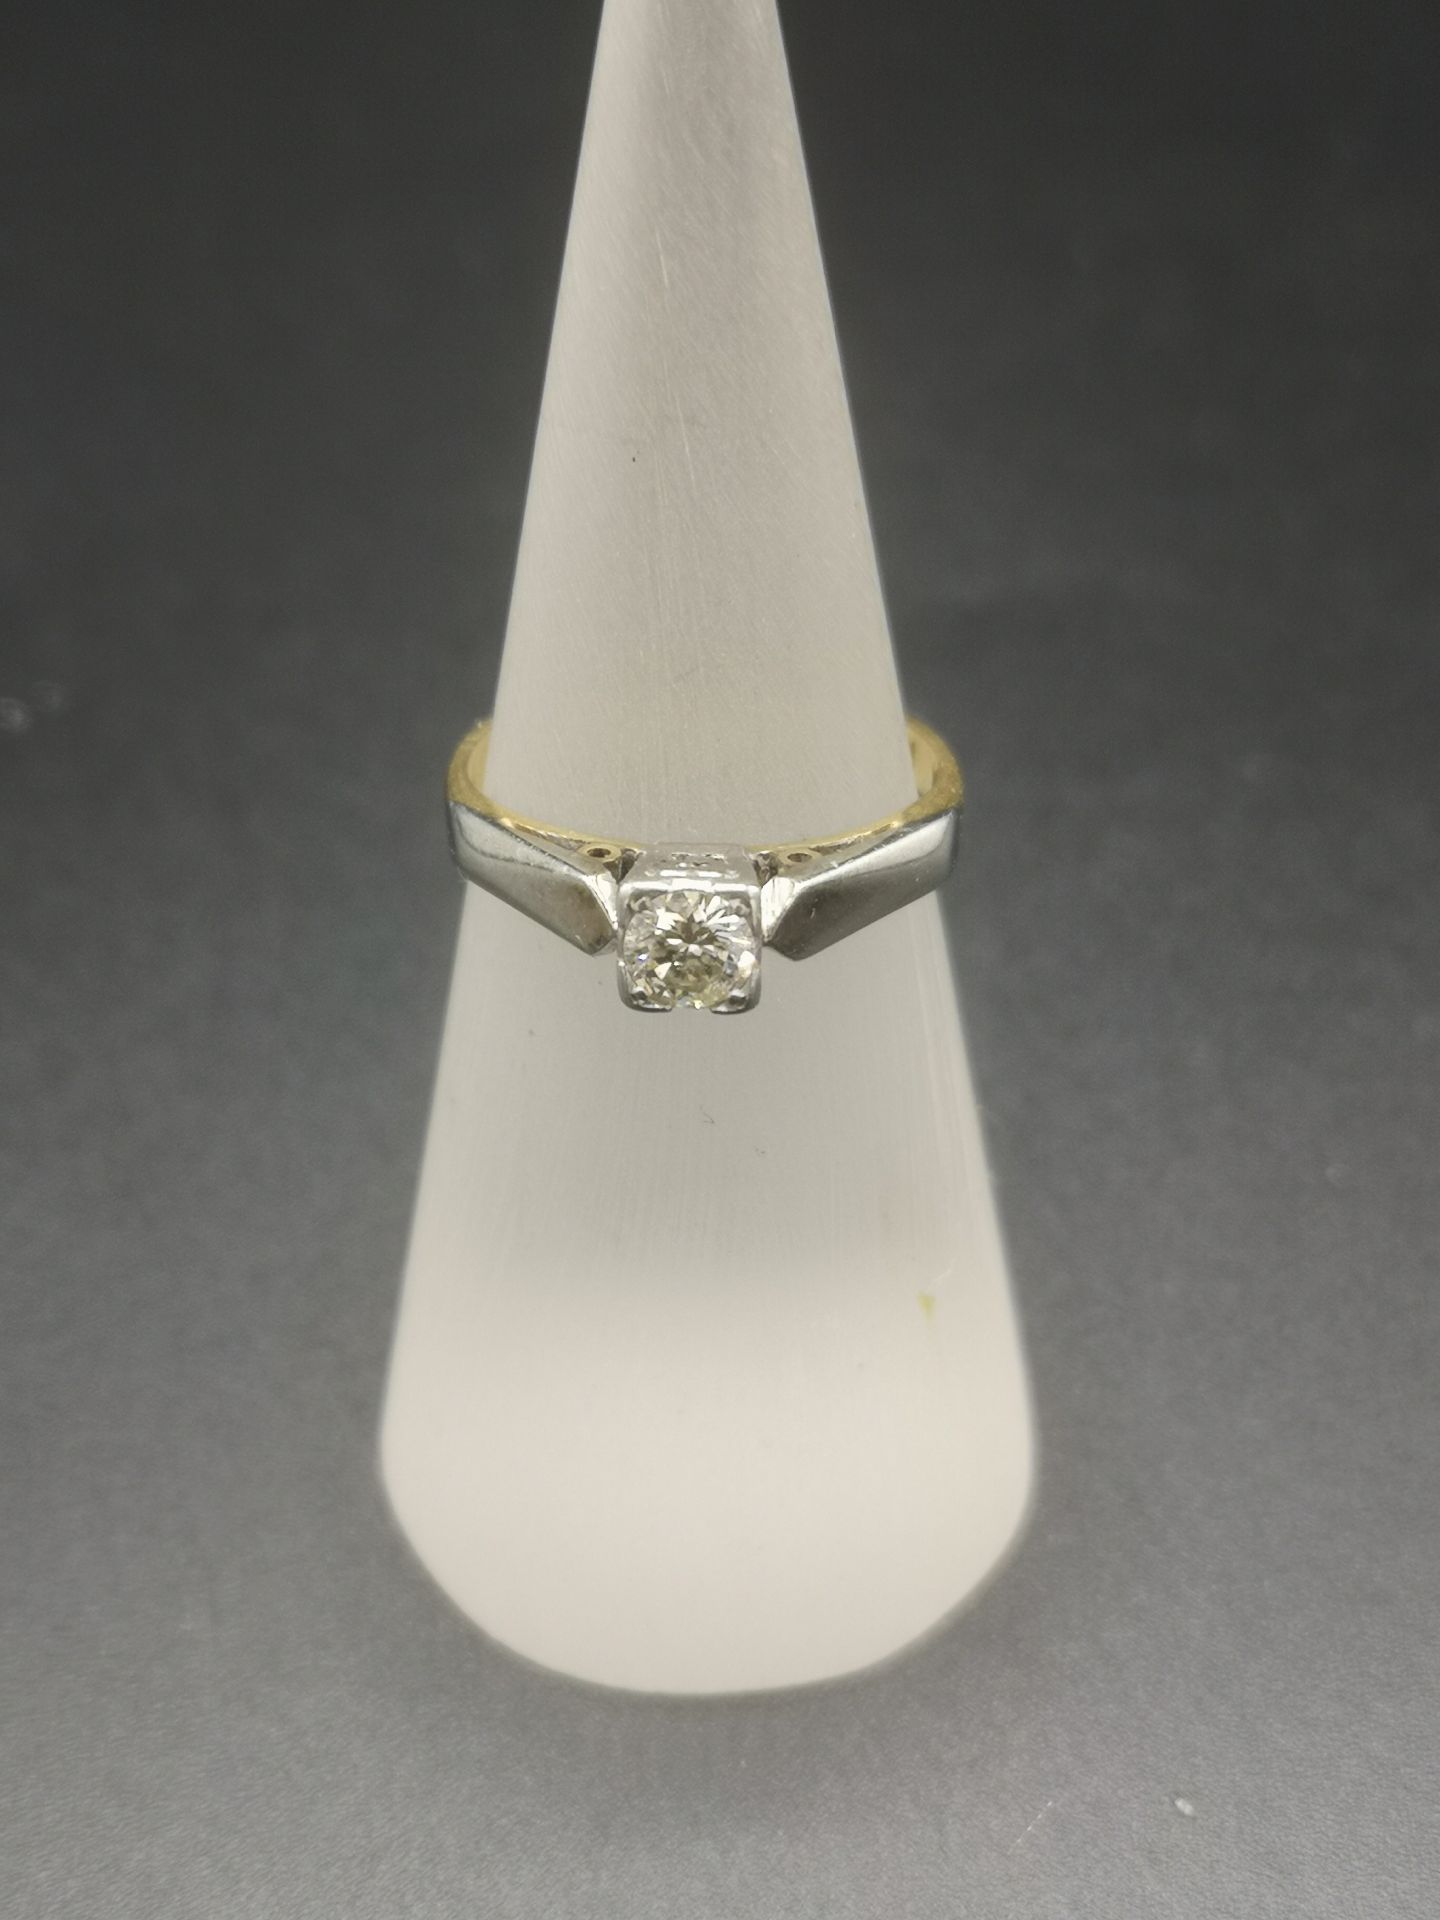 18ct gold and diamond solitaire ring - Image 2 of 5